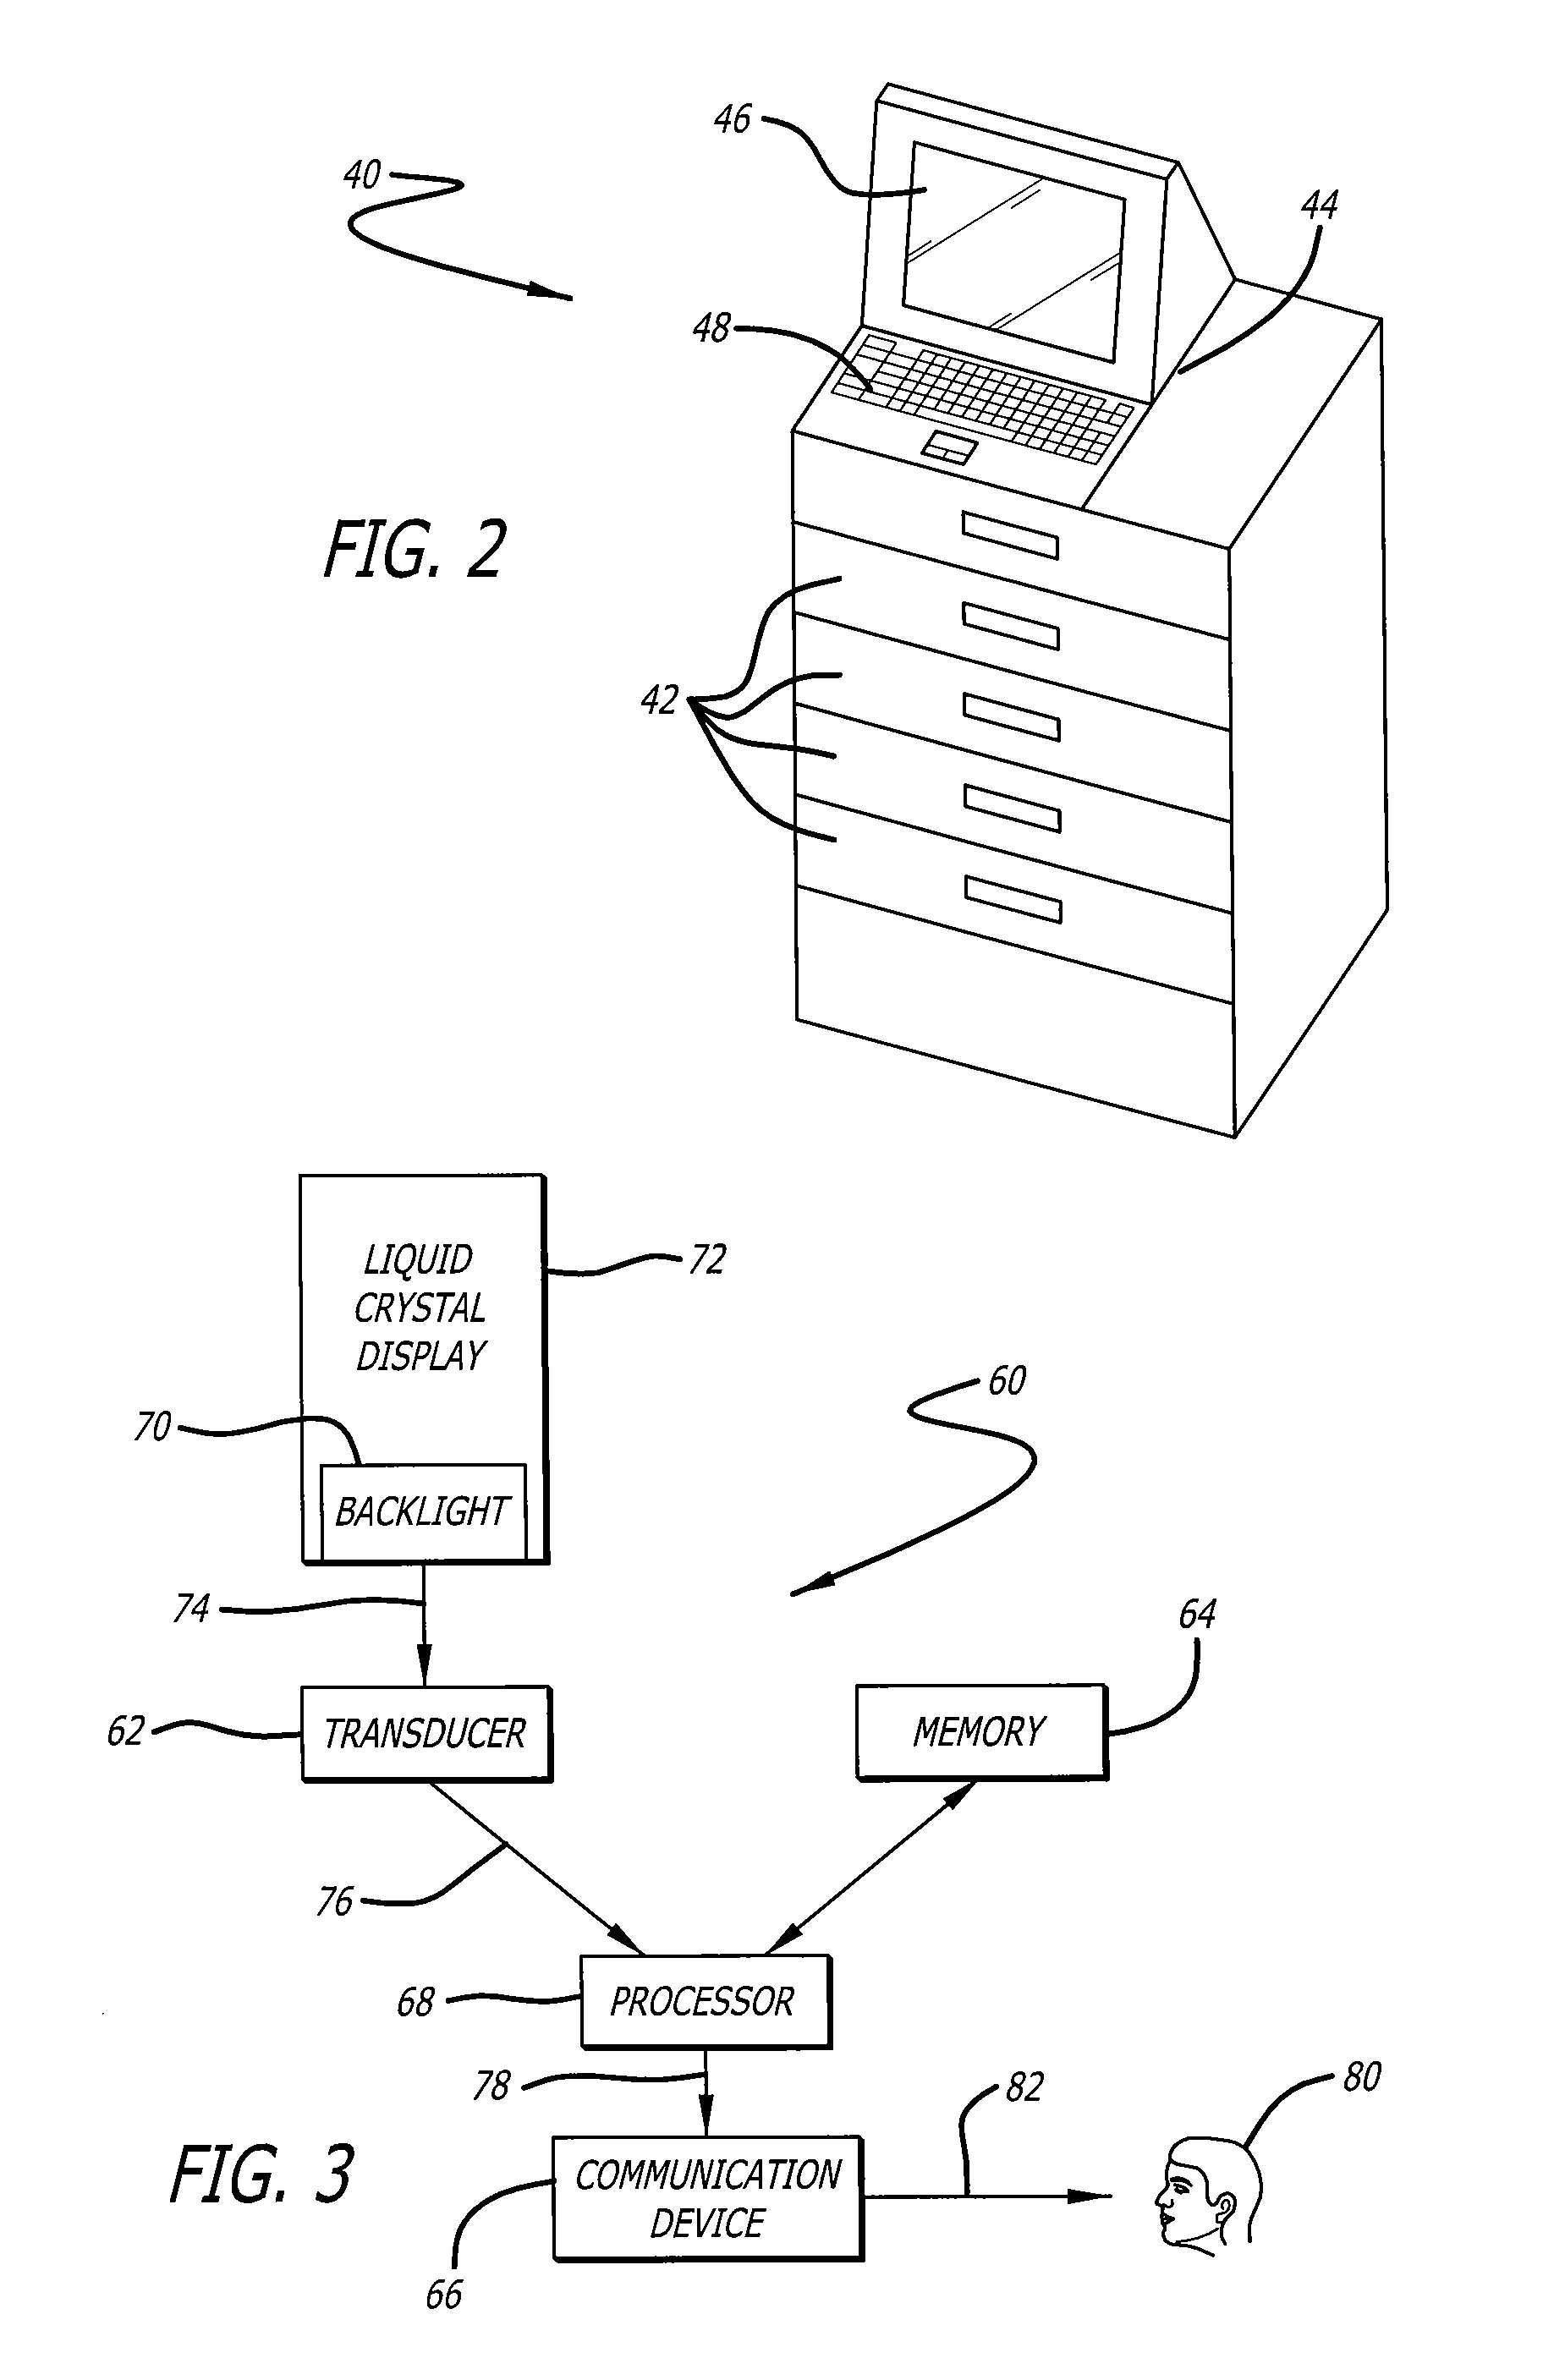 System and method for predicting a failure of a backlight for an LCD display